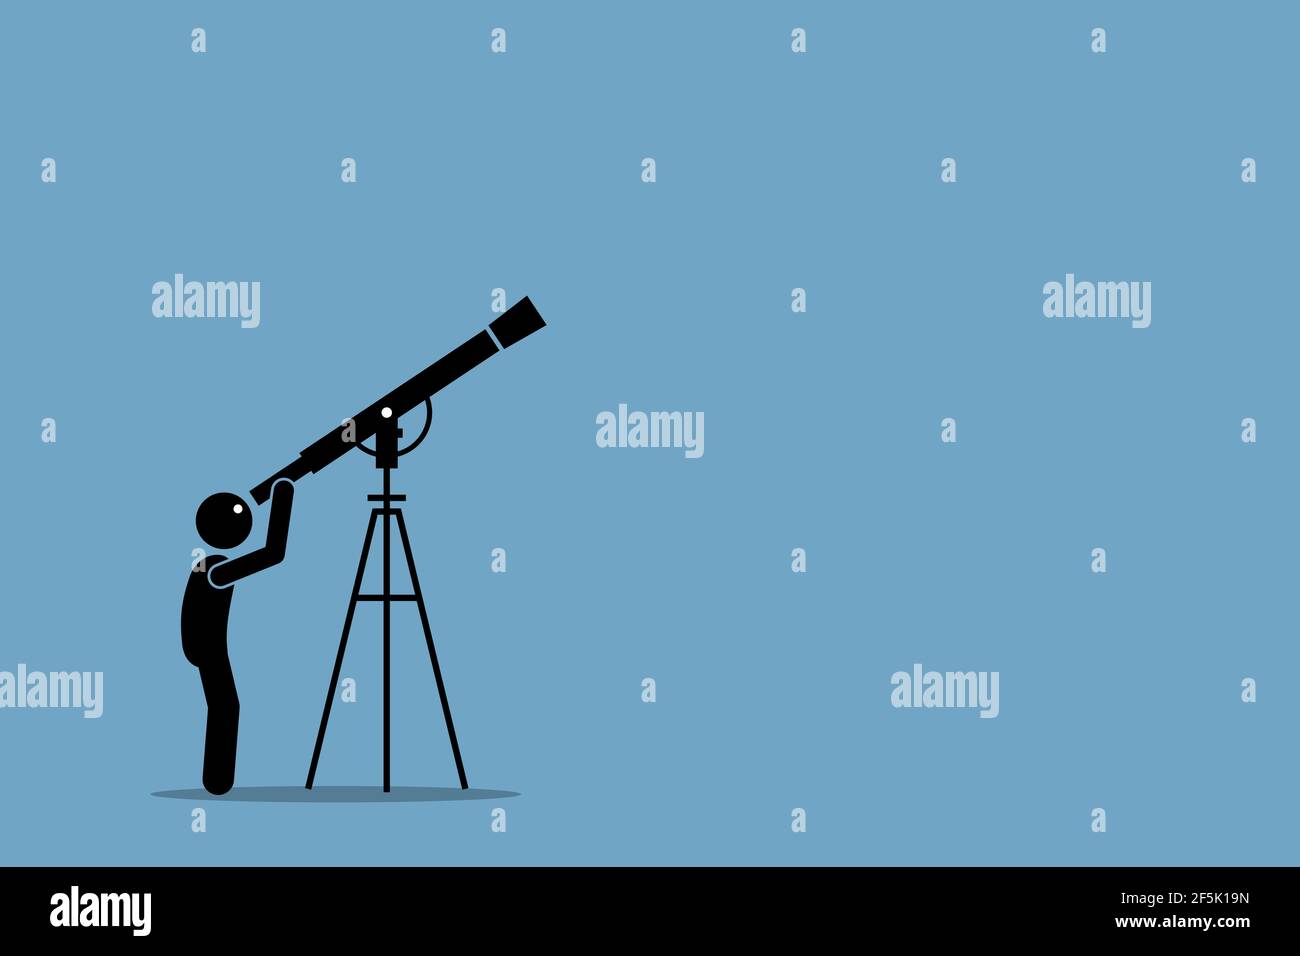 Stick figure man looking through telescope pointing to the sky. Vector illustration concept of star gazing, universe discovery, far away distant, spac Stock Vector